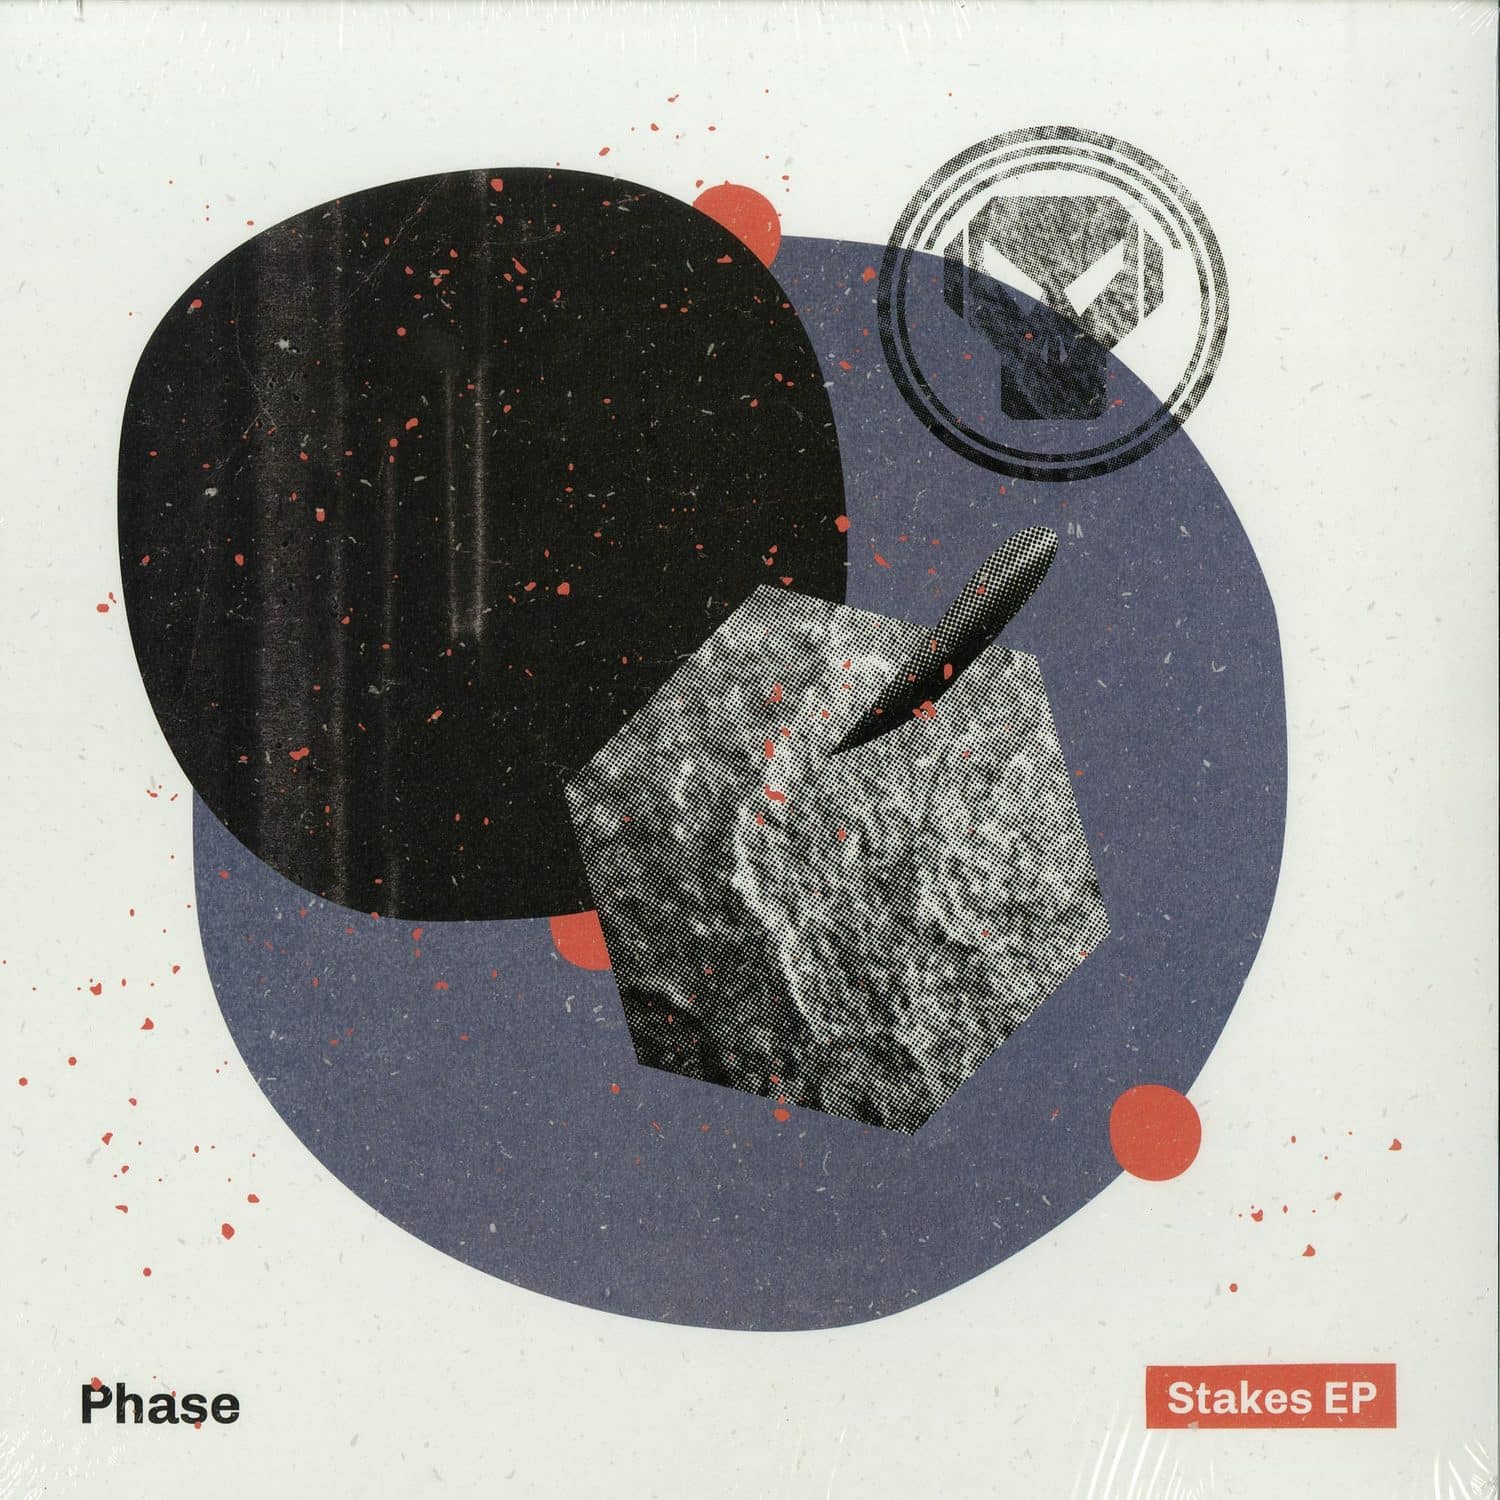 Phase - STAKES EP